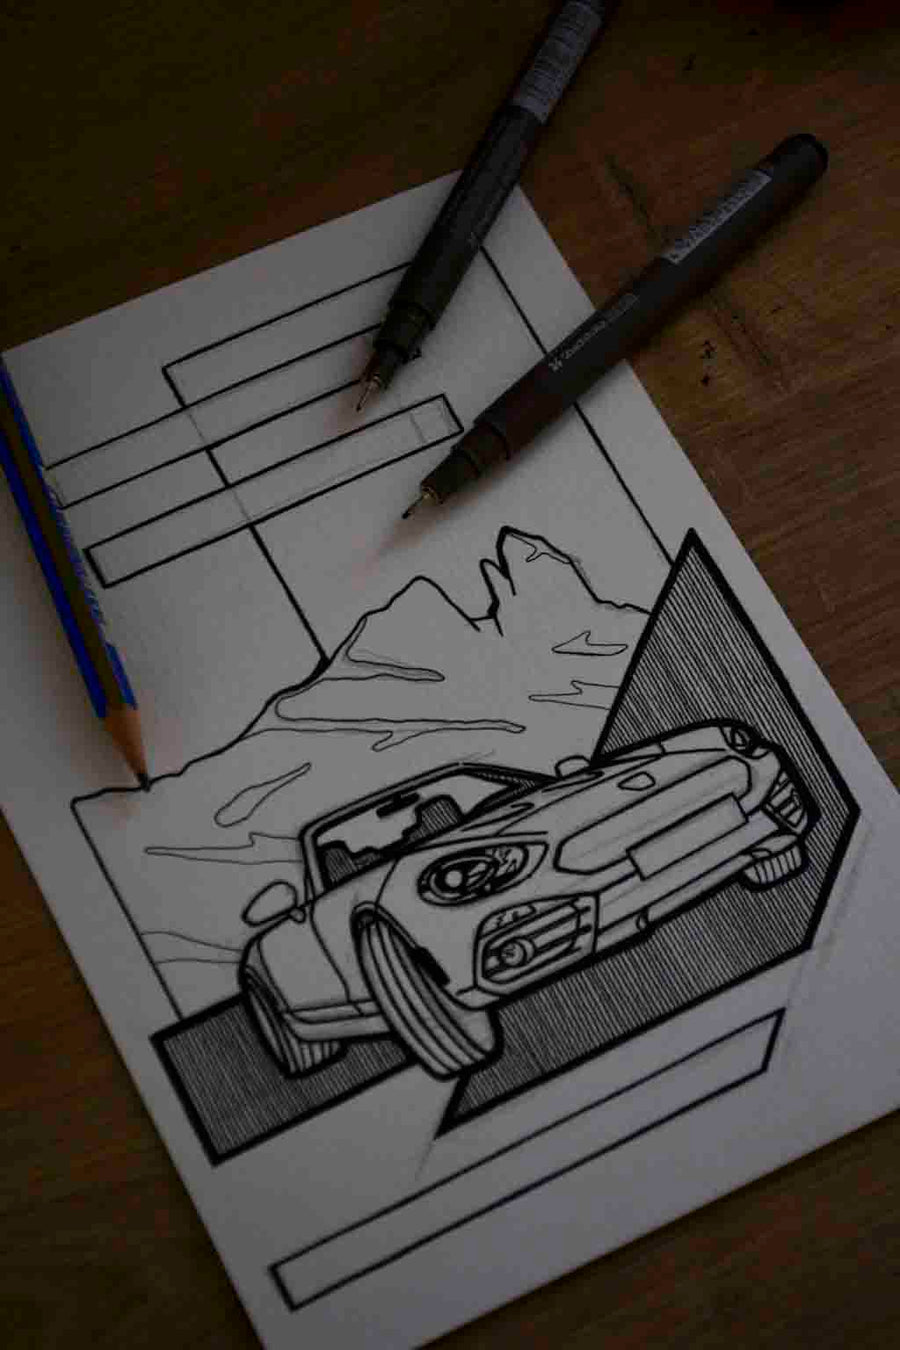 Inspiration from @bermuda.06 /ABARTH 124 SPIDER Handmade Artwork and Coloring Pages (Option Puzzle)